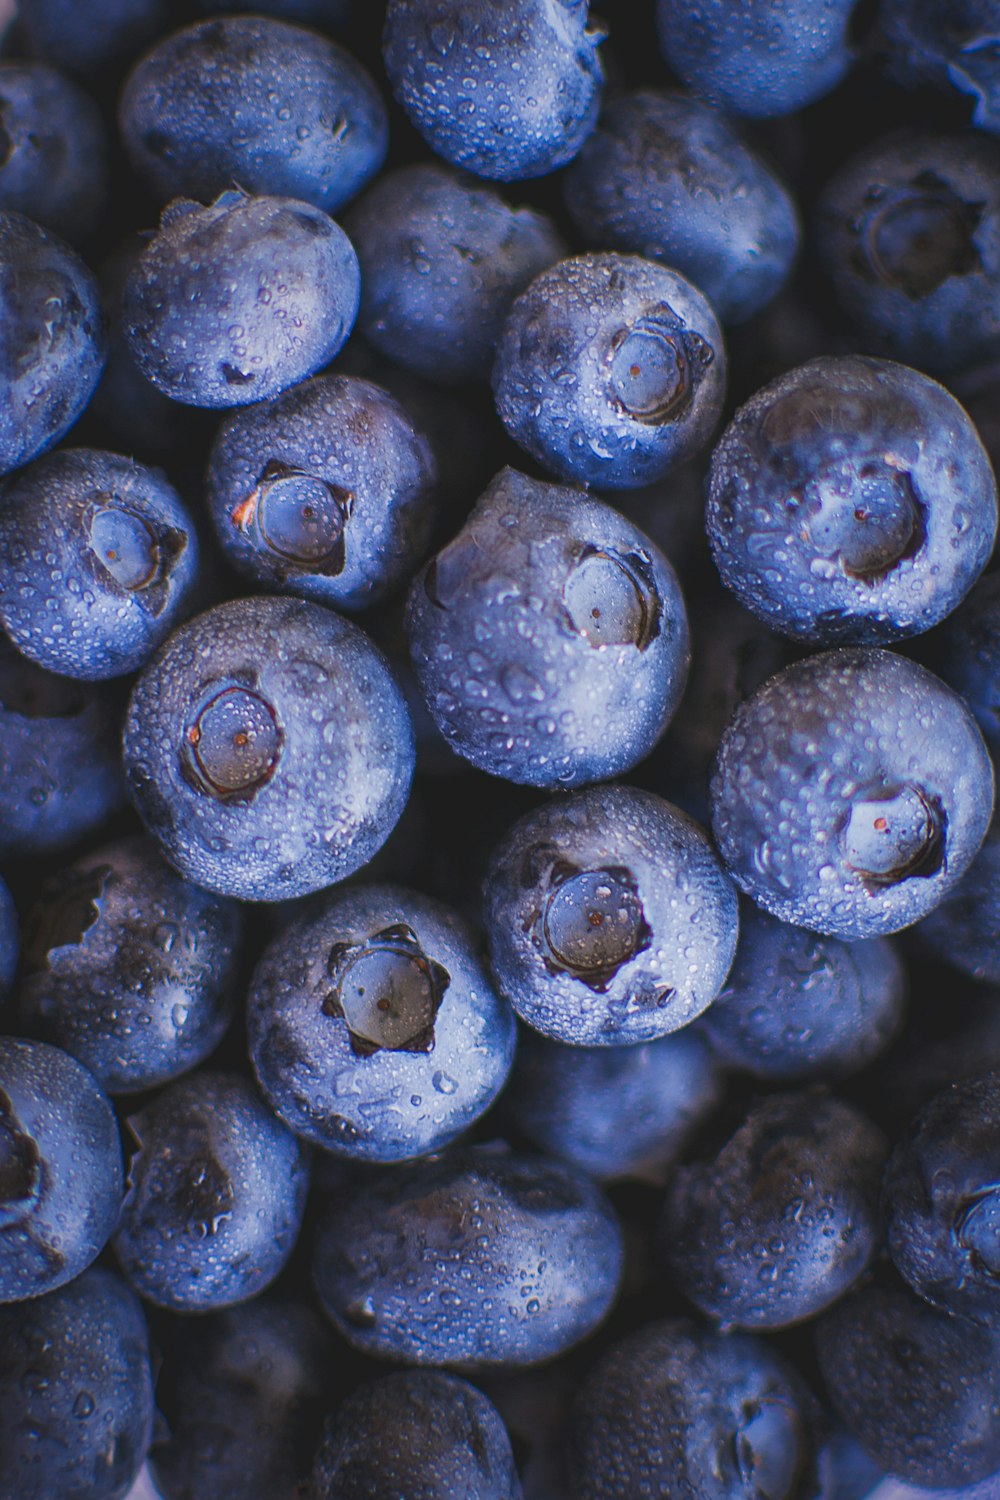 a close up of blueberries with water droplets on them